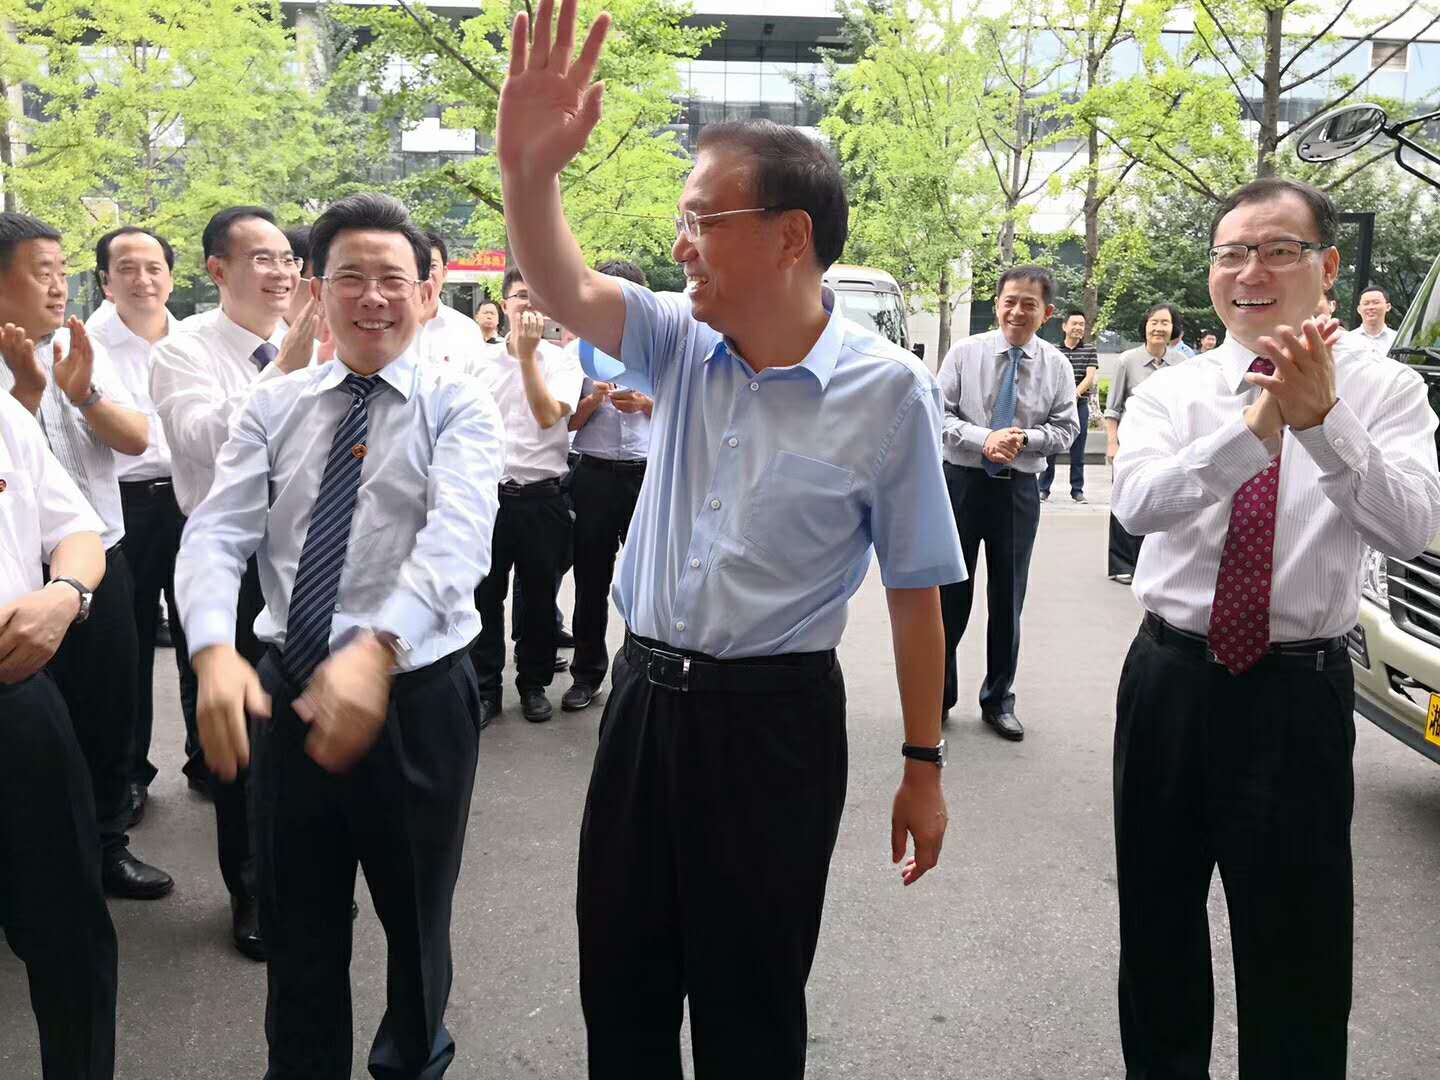 Mr. Keqiang Lee’s visit to CSCERAMIC office building